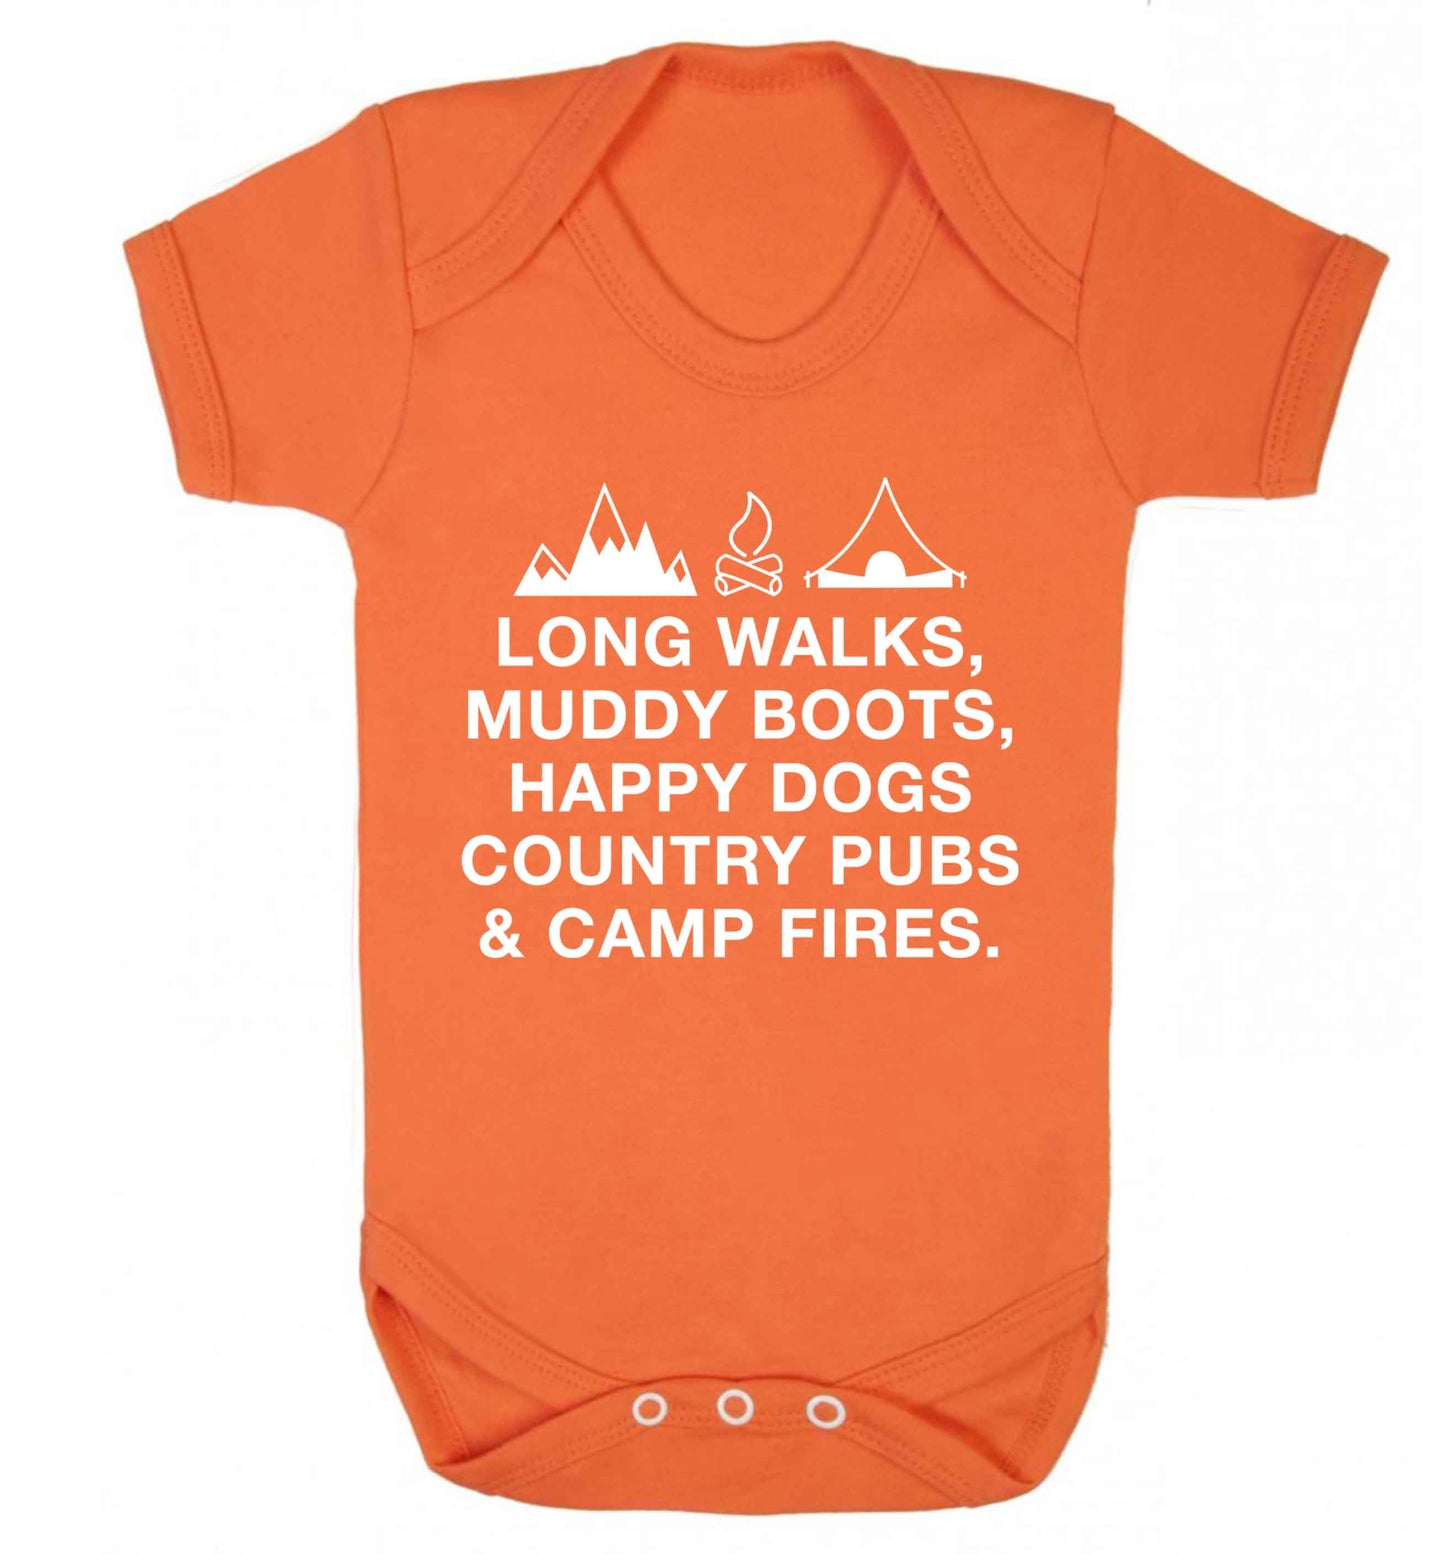 Long walks muddy boots happy dogs country pubs and camp fires Baby Vest orange 18-24 months